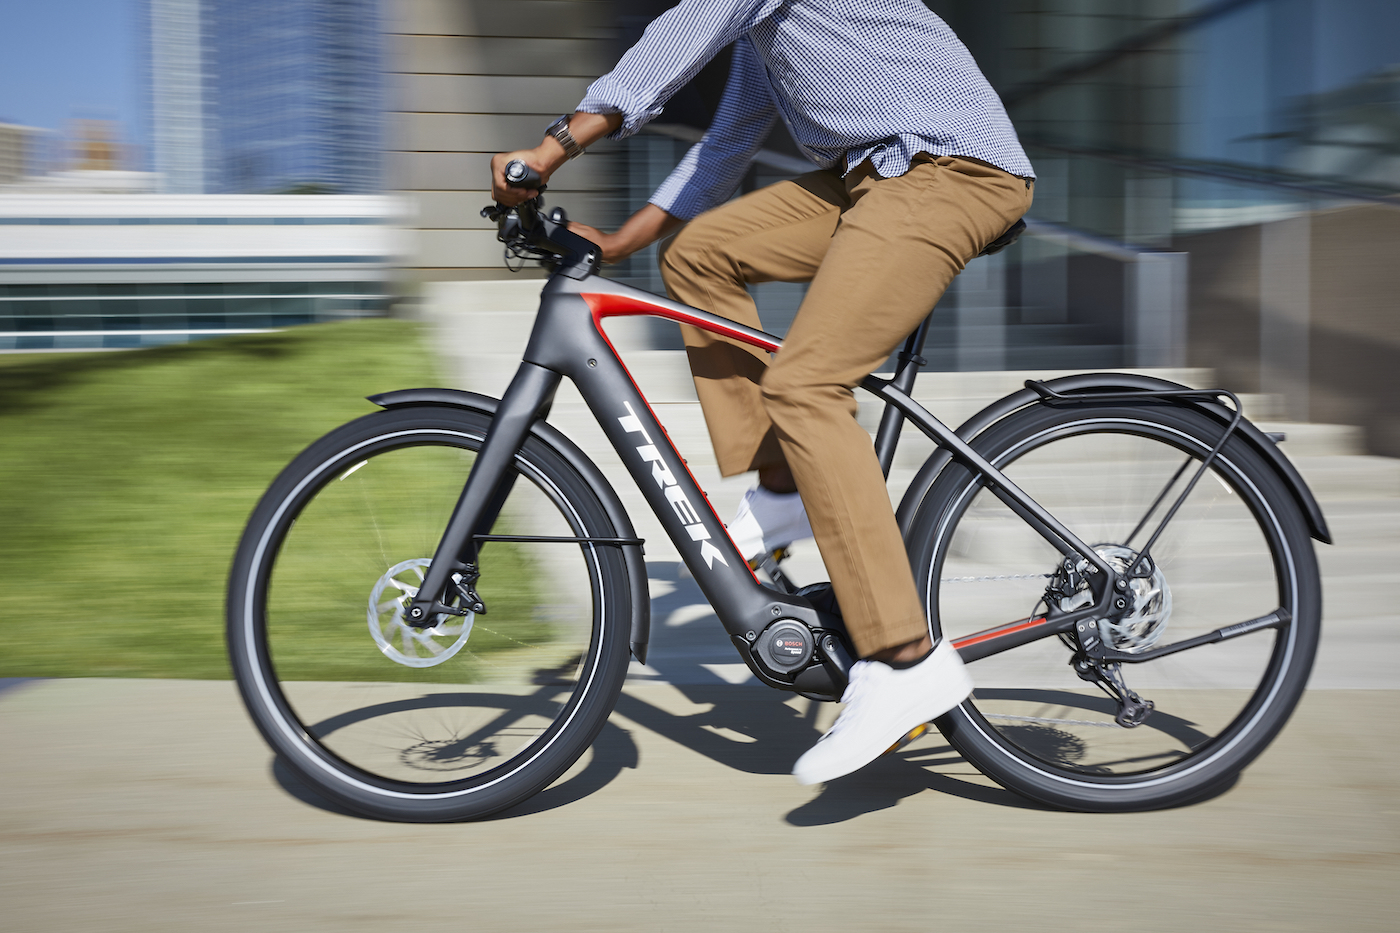 Trek rolls out new 28 mph ebikes with Bosch's updated motors and